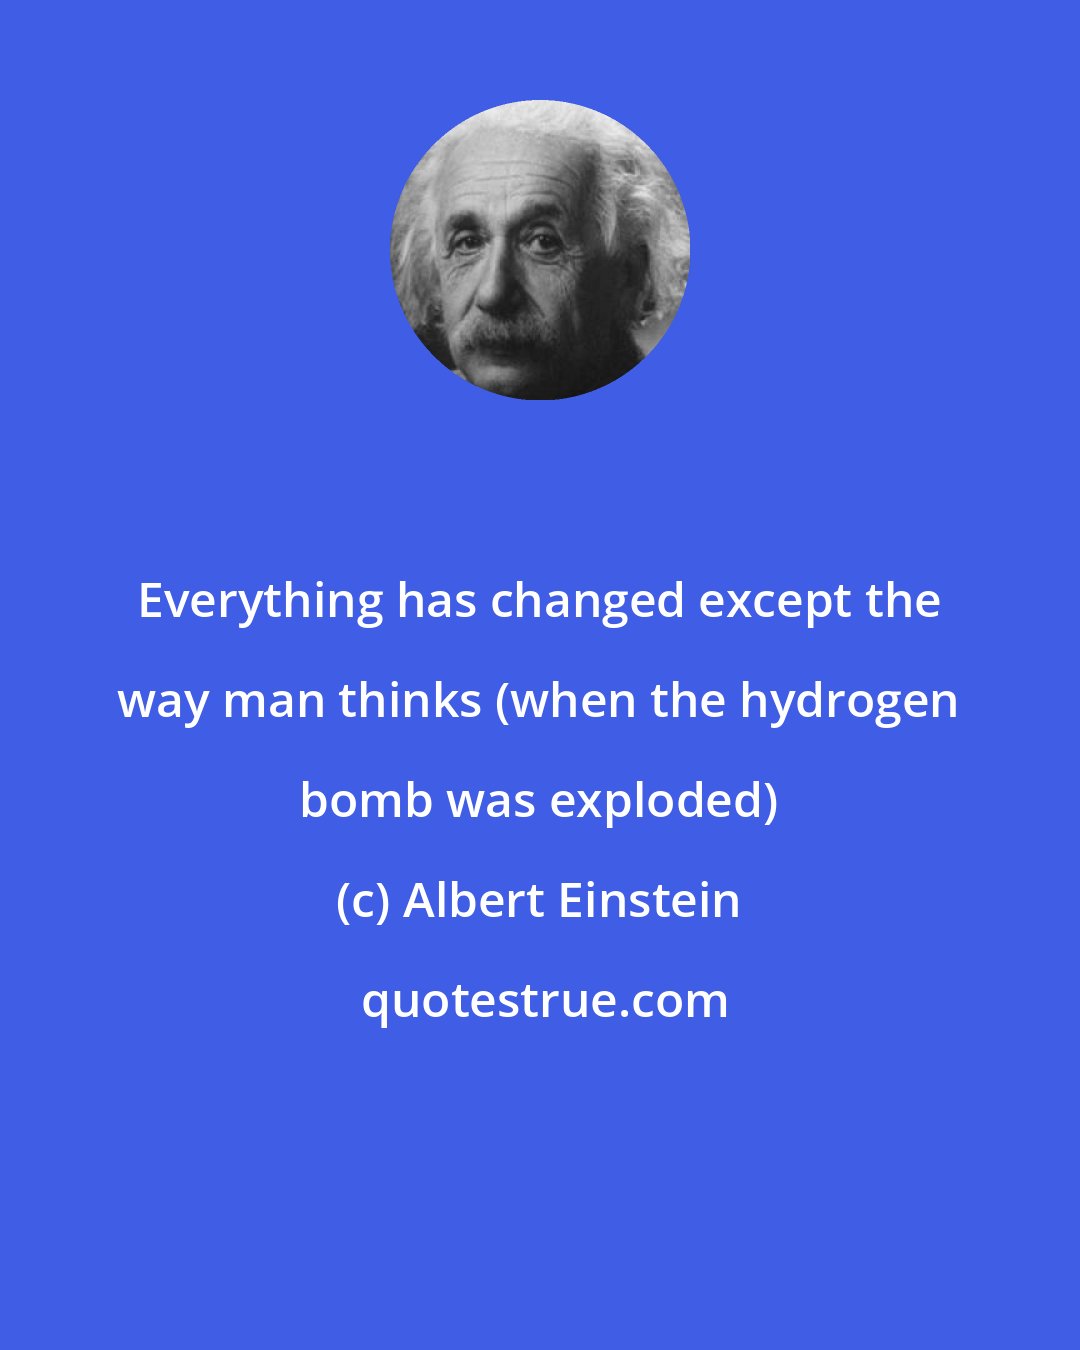 Albert Einstein: Everything has changed except the way man thinks (when the hydrogen bomb was exploded)